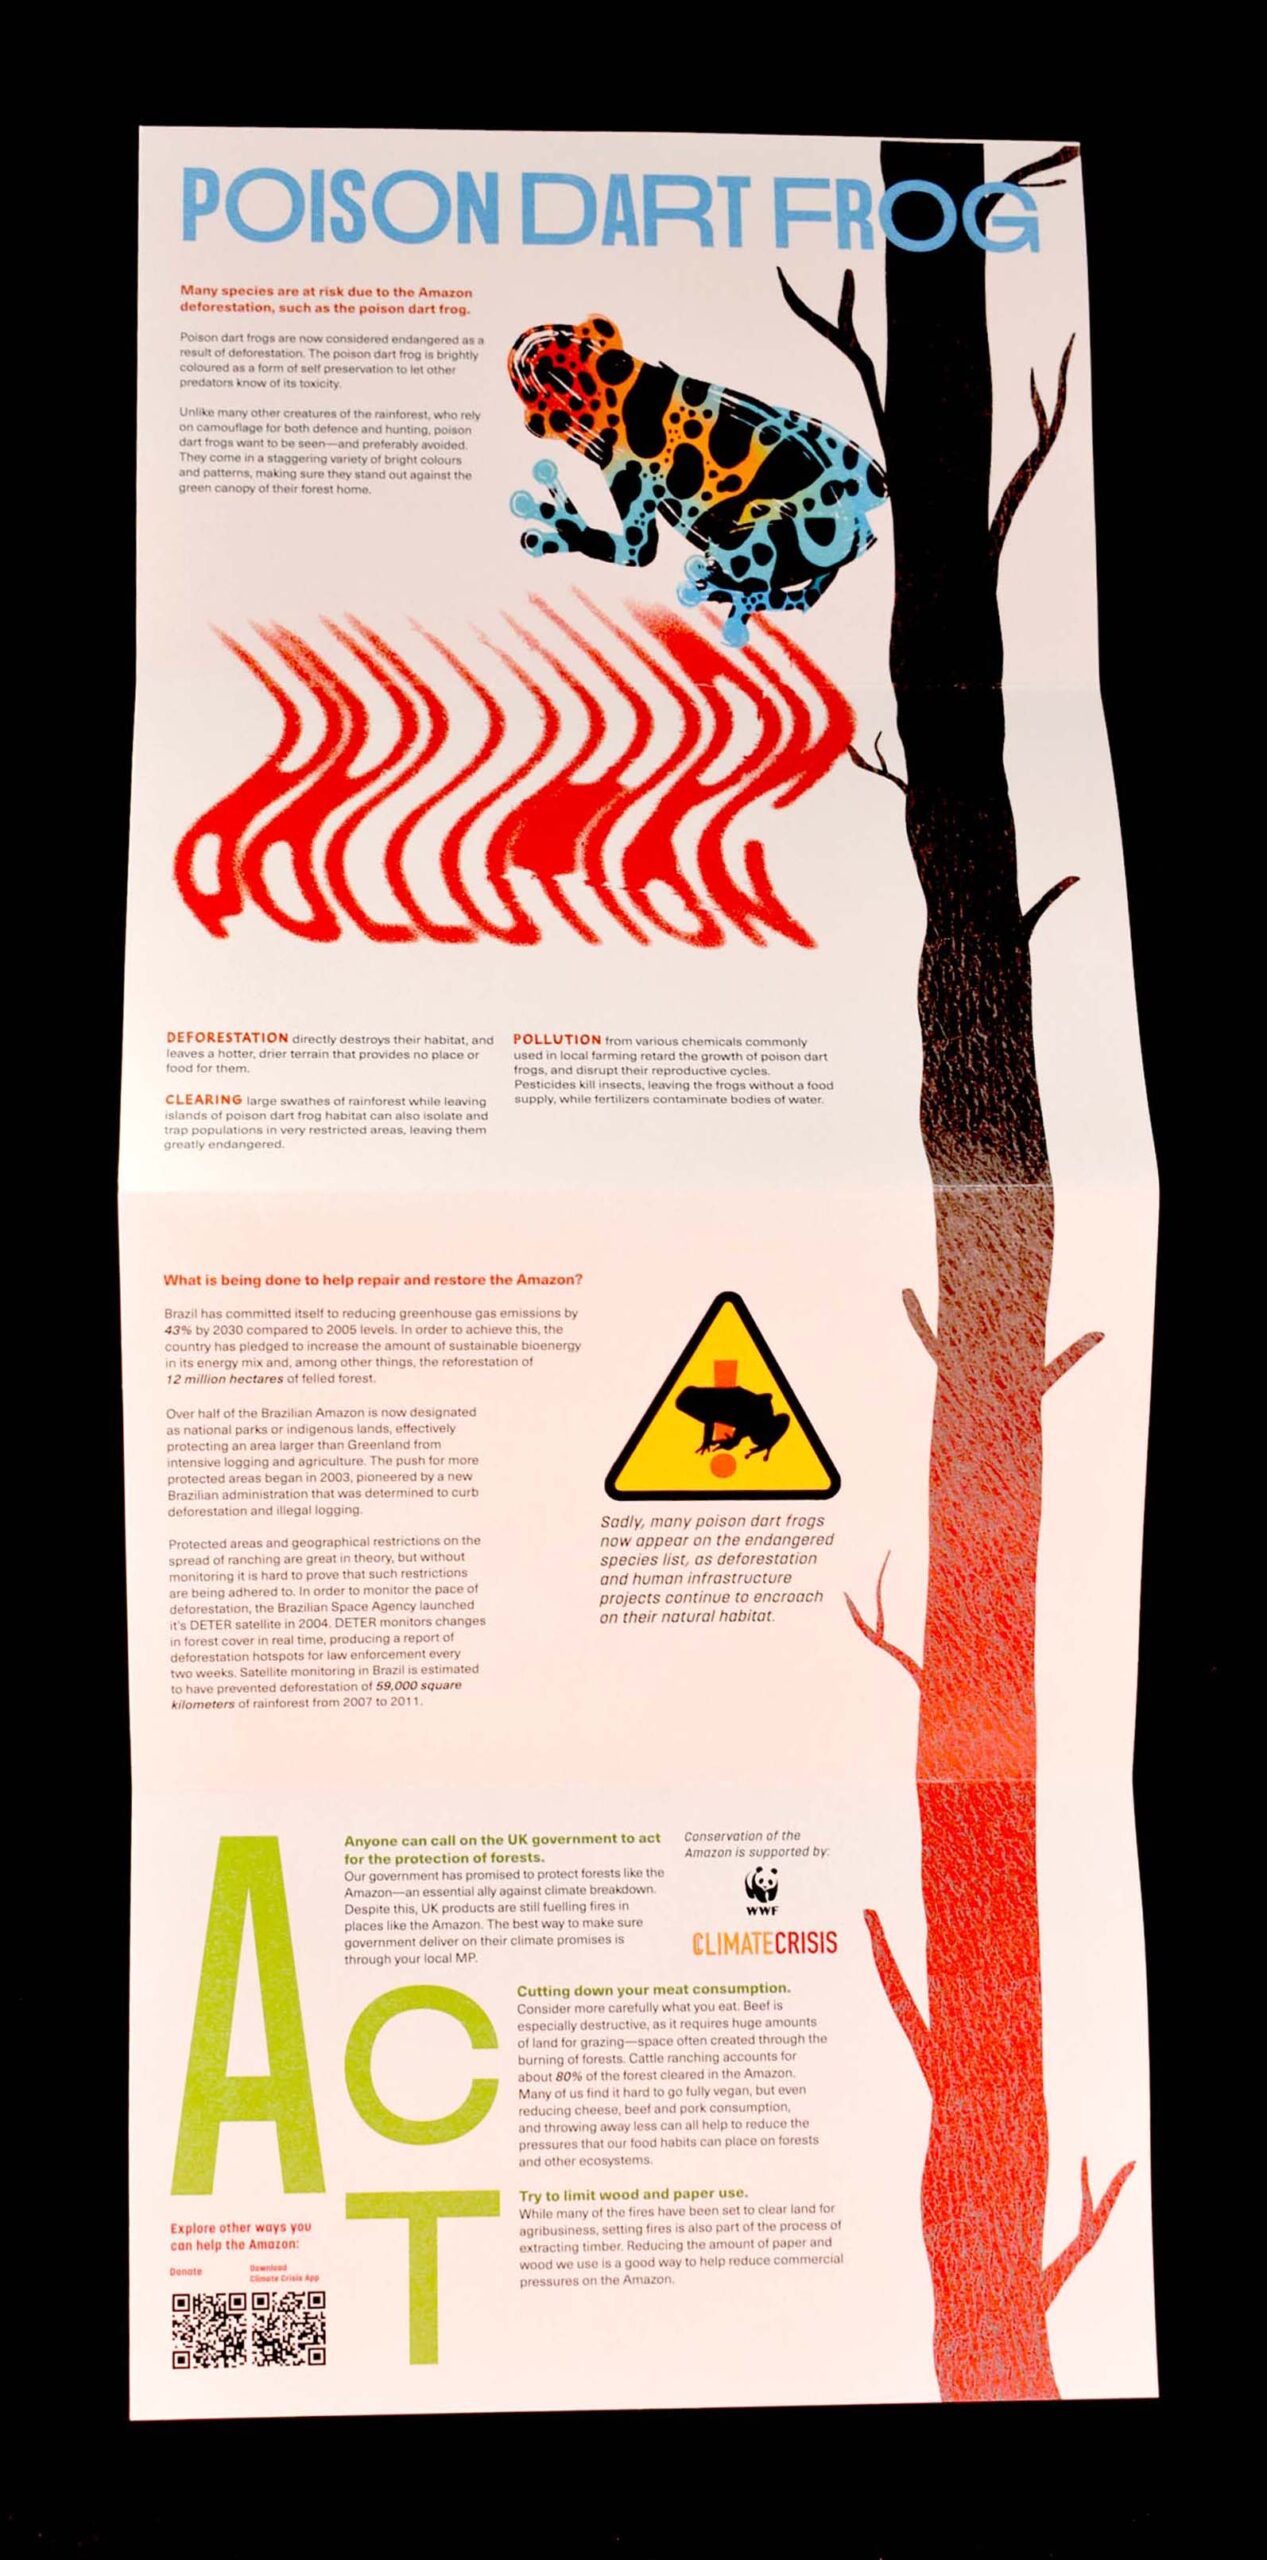 Overview of booklet showing tree graphic